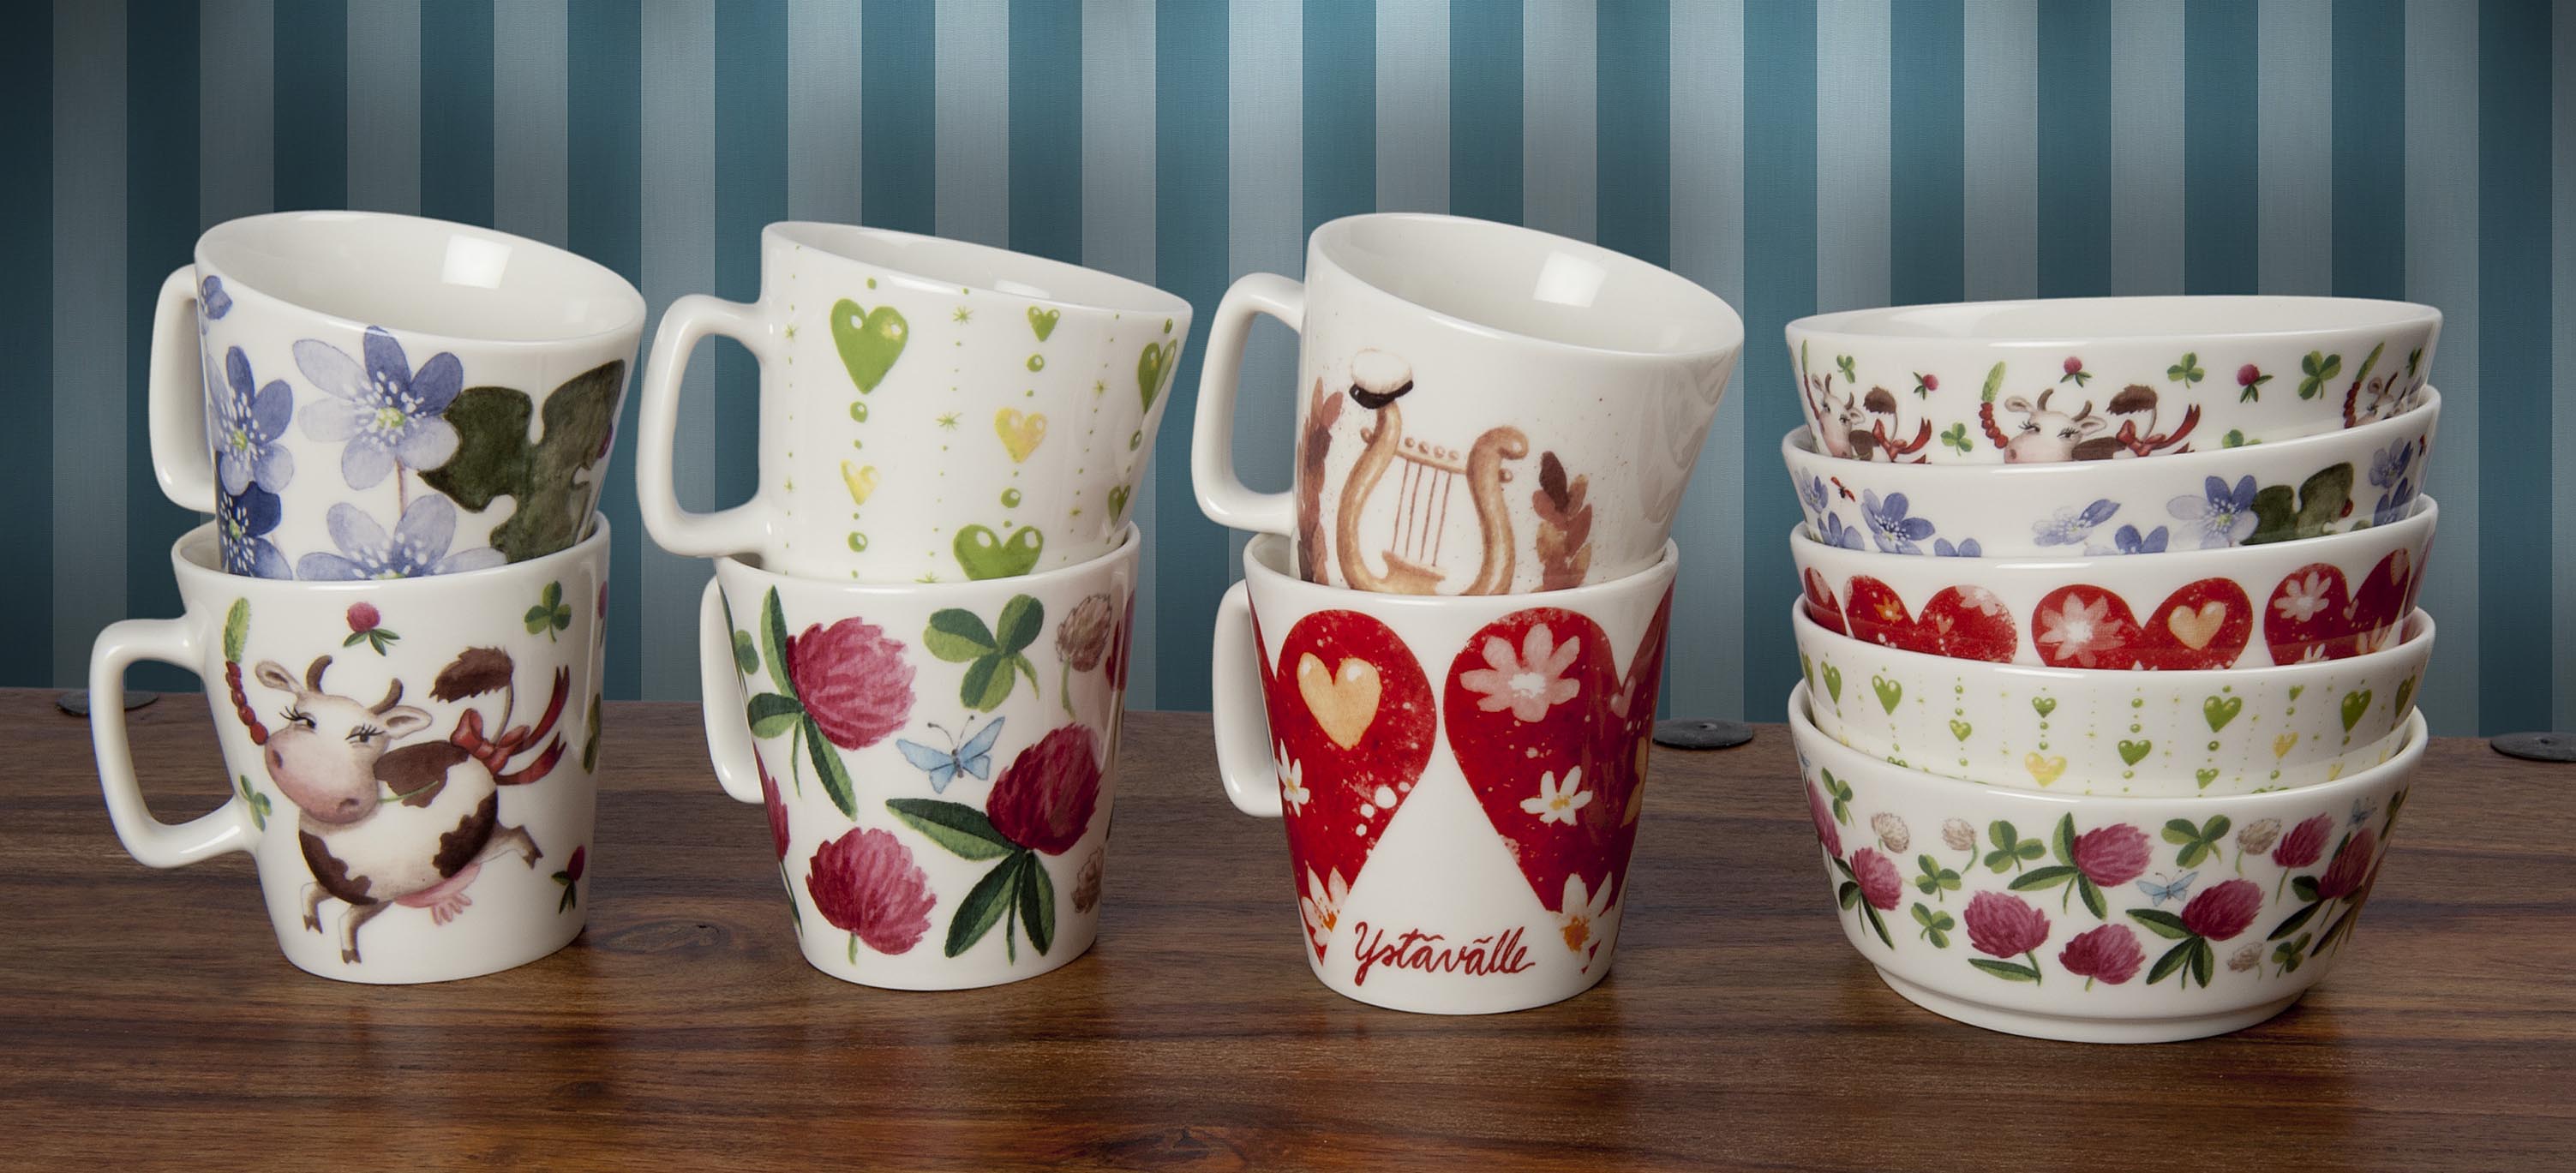 Mugs and bowls decorated with ceramic decals